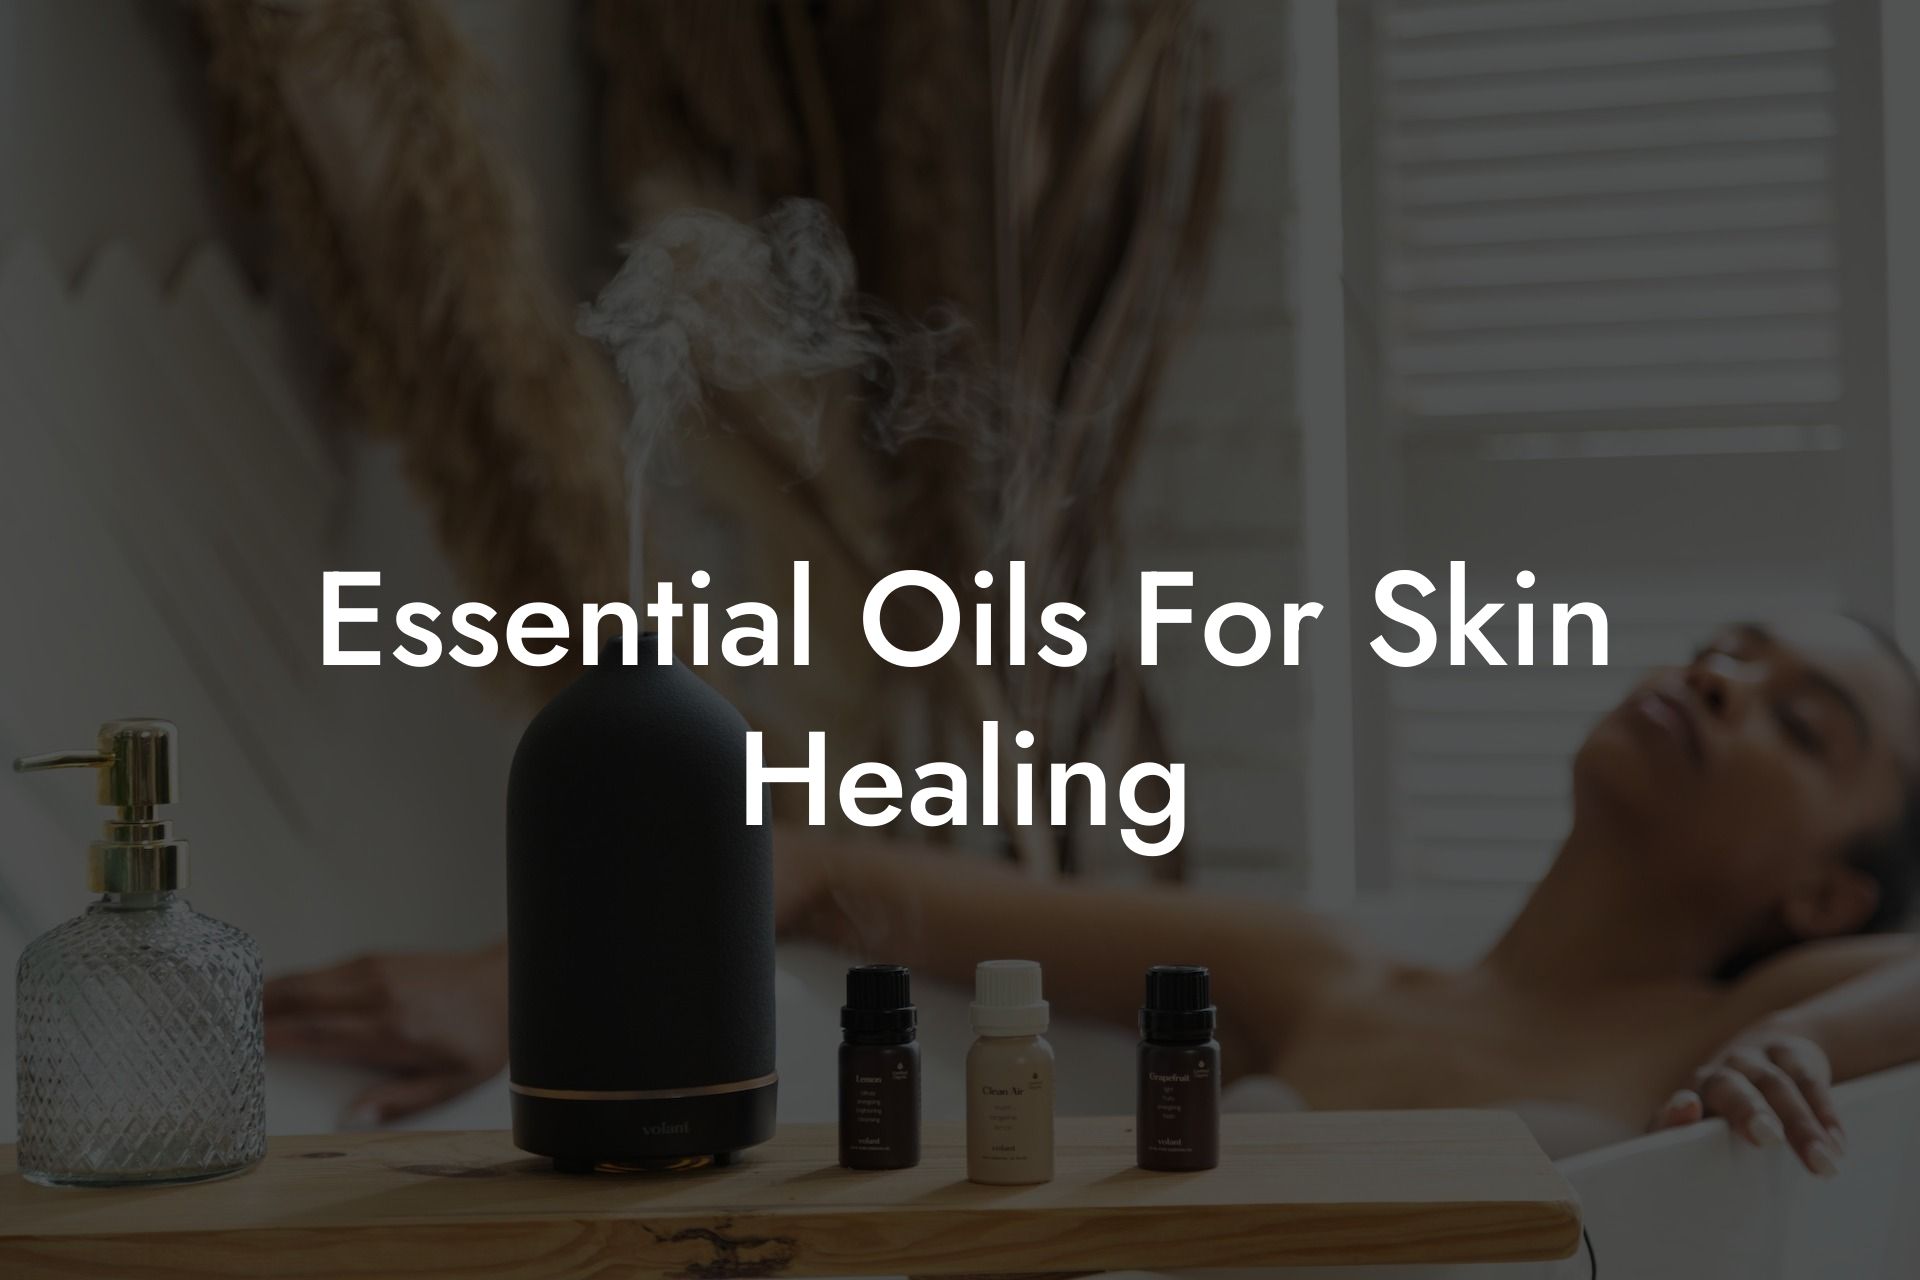 Essential Oils For Skin Healing